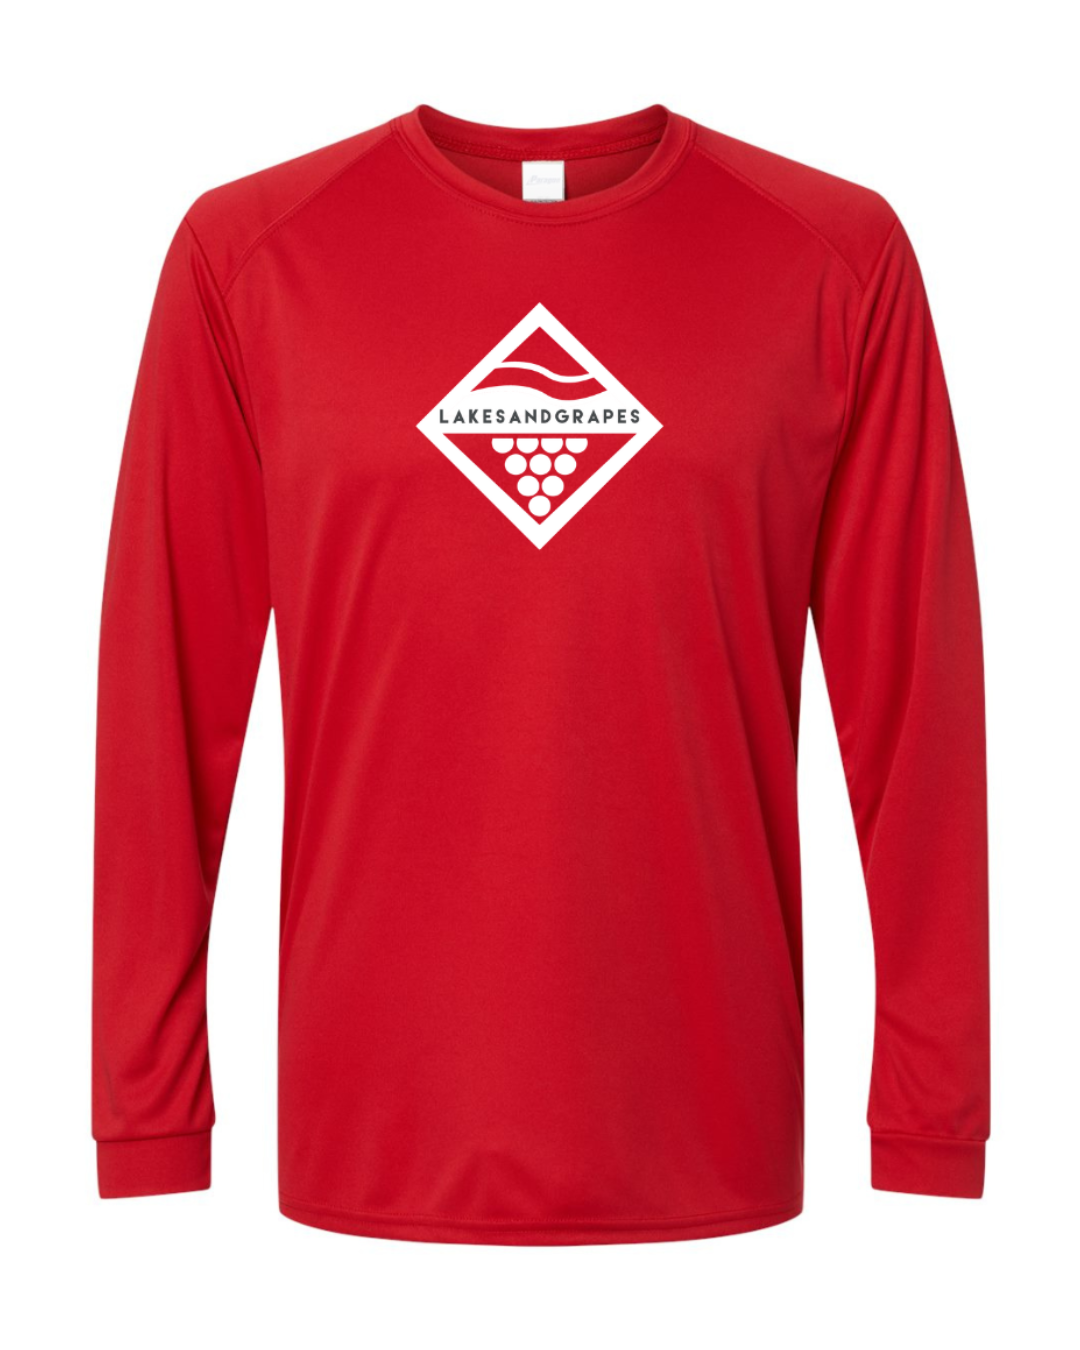 The image shows a Nautical Paddle Active Long Sleeve shirt. The shirt is designed for active wear, featuring long sleeves for added coverage and protection.